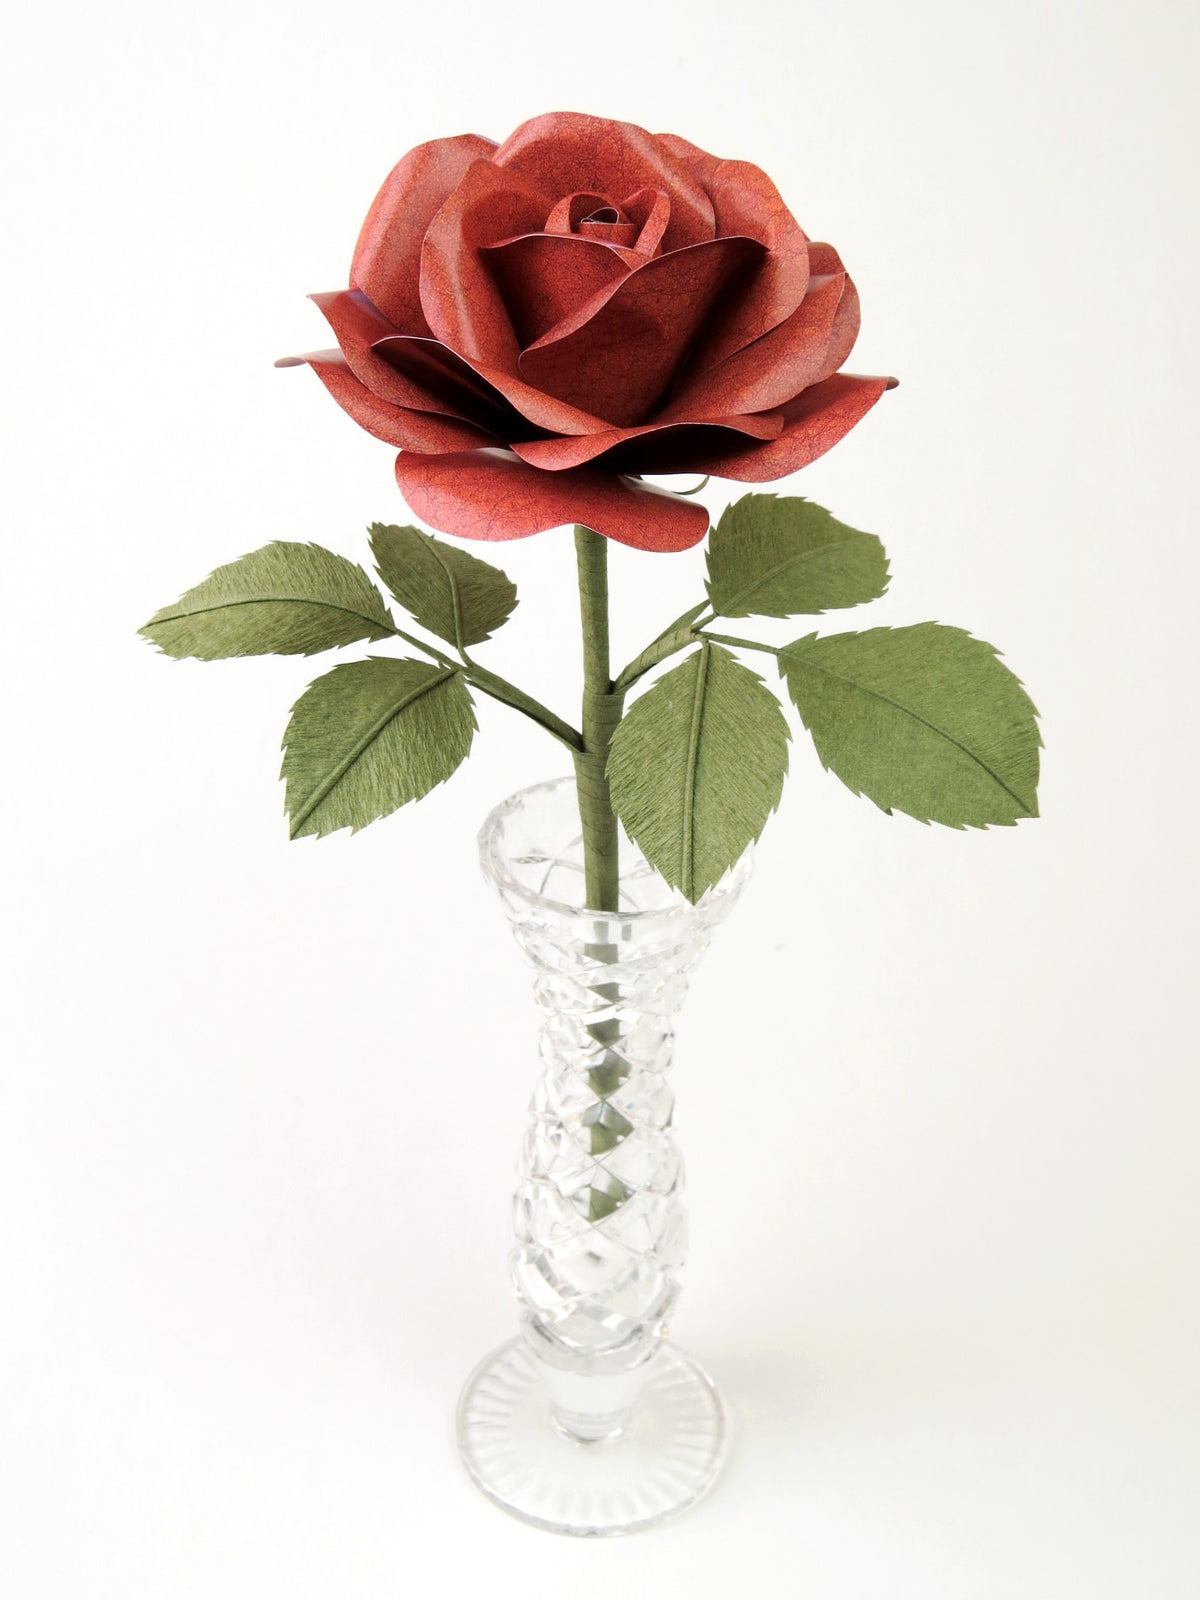 Brown leather grain paper rose with six leaves standing in a narrow glass vase against a light grey background